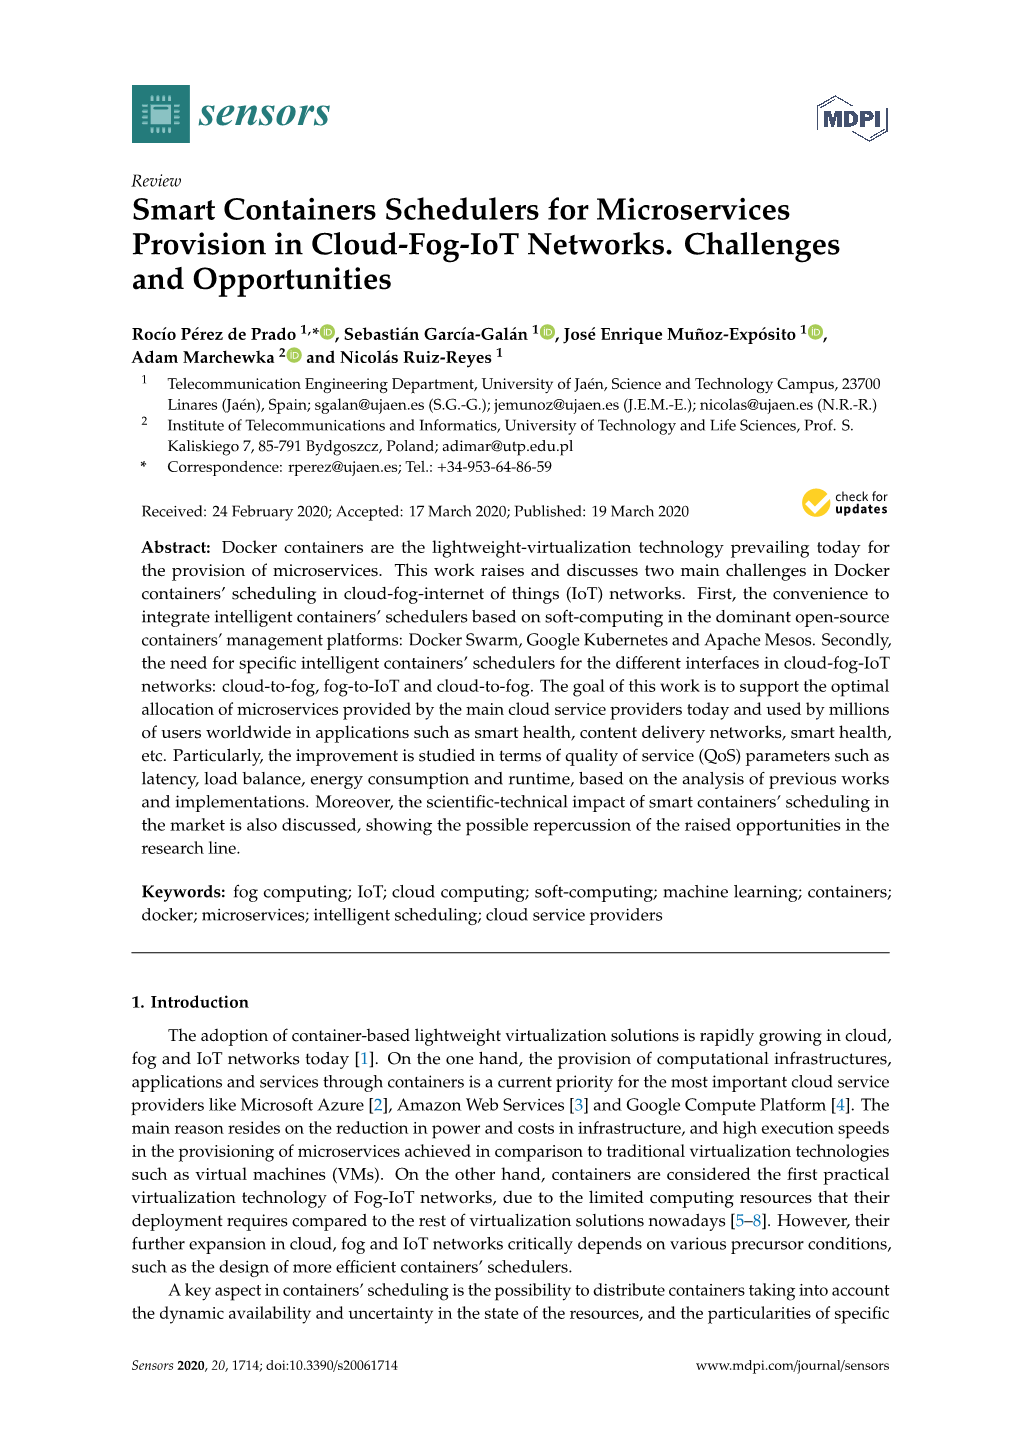 Smart Containers Schedulers for Microservices Provision in Cloud-Fog-Iot Networks. Challenges and Opportunities